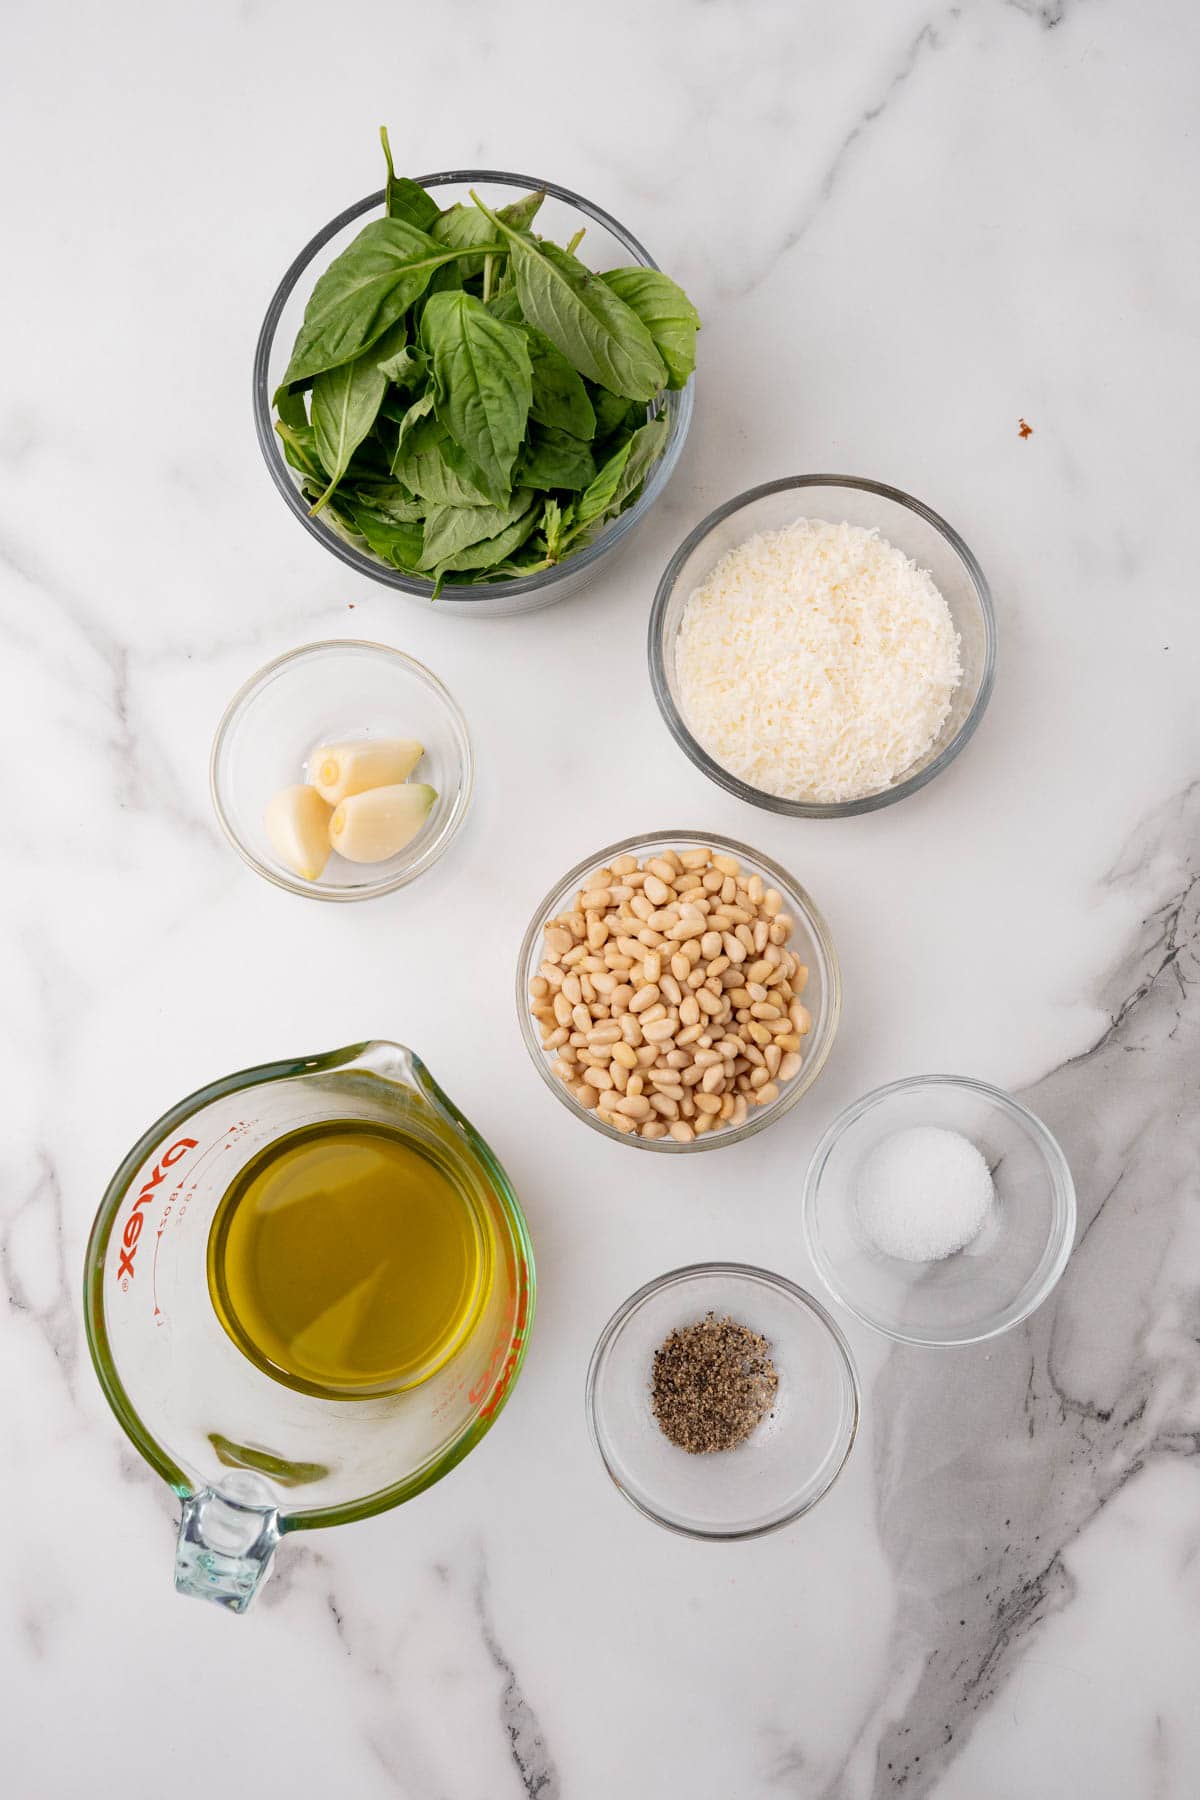 Ingredients for pesto on a marble surface